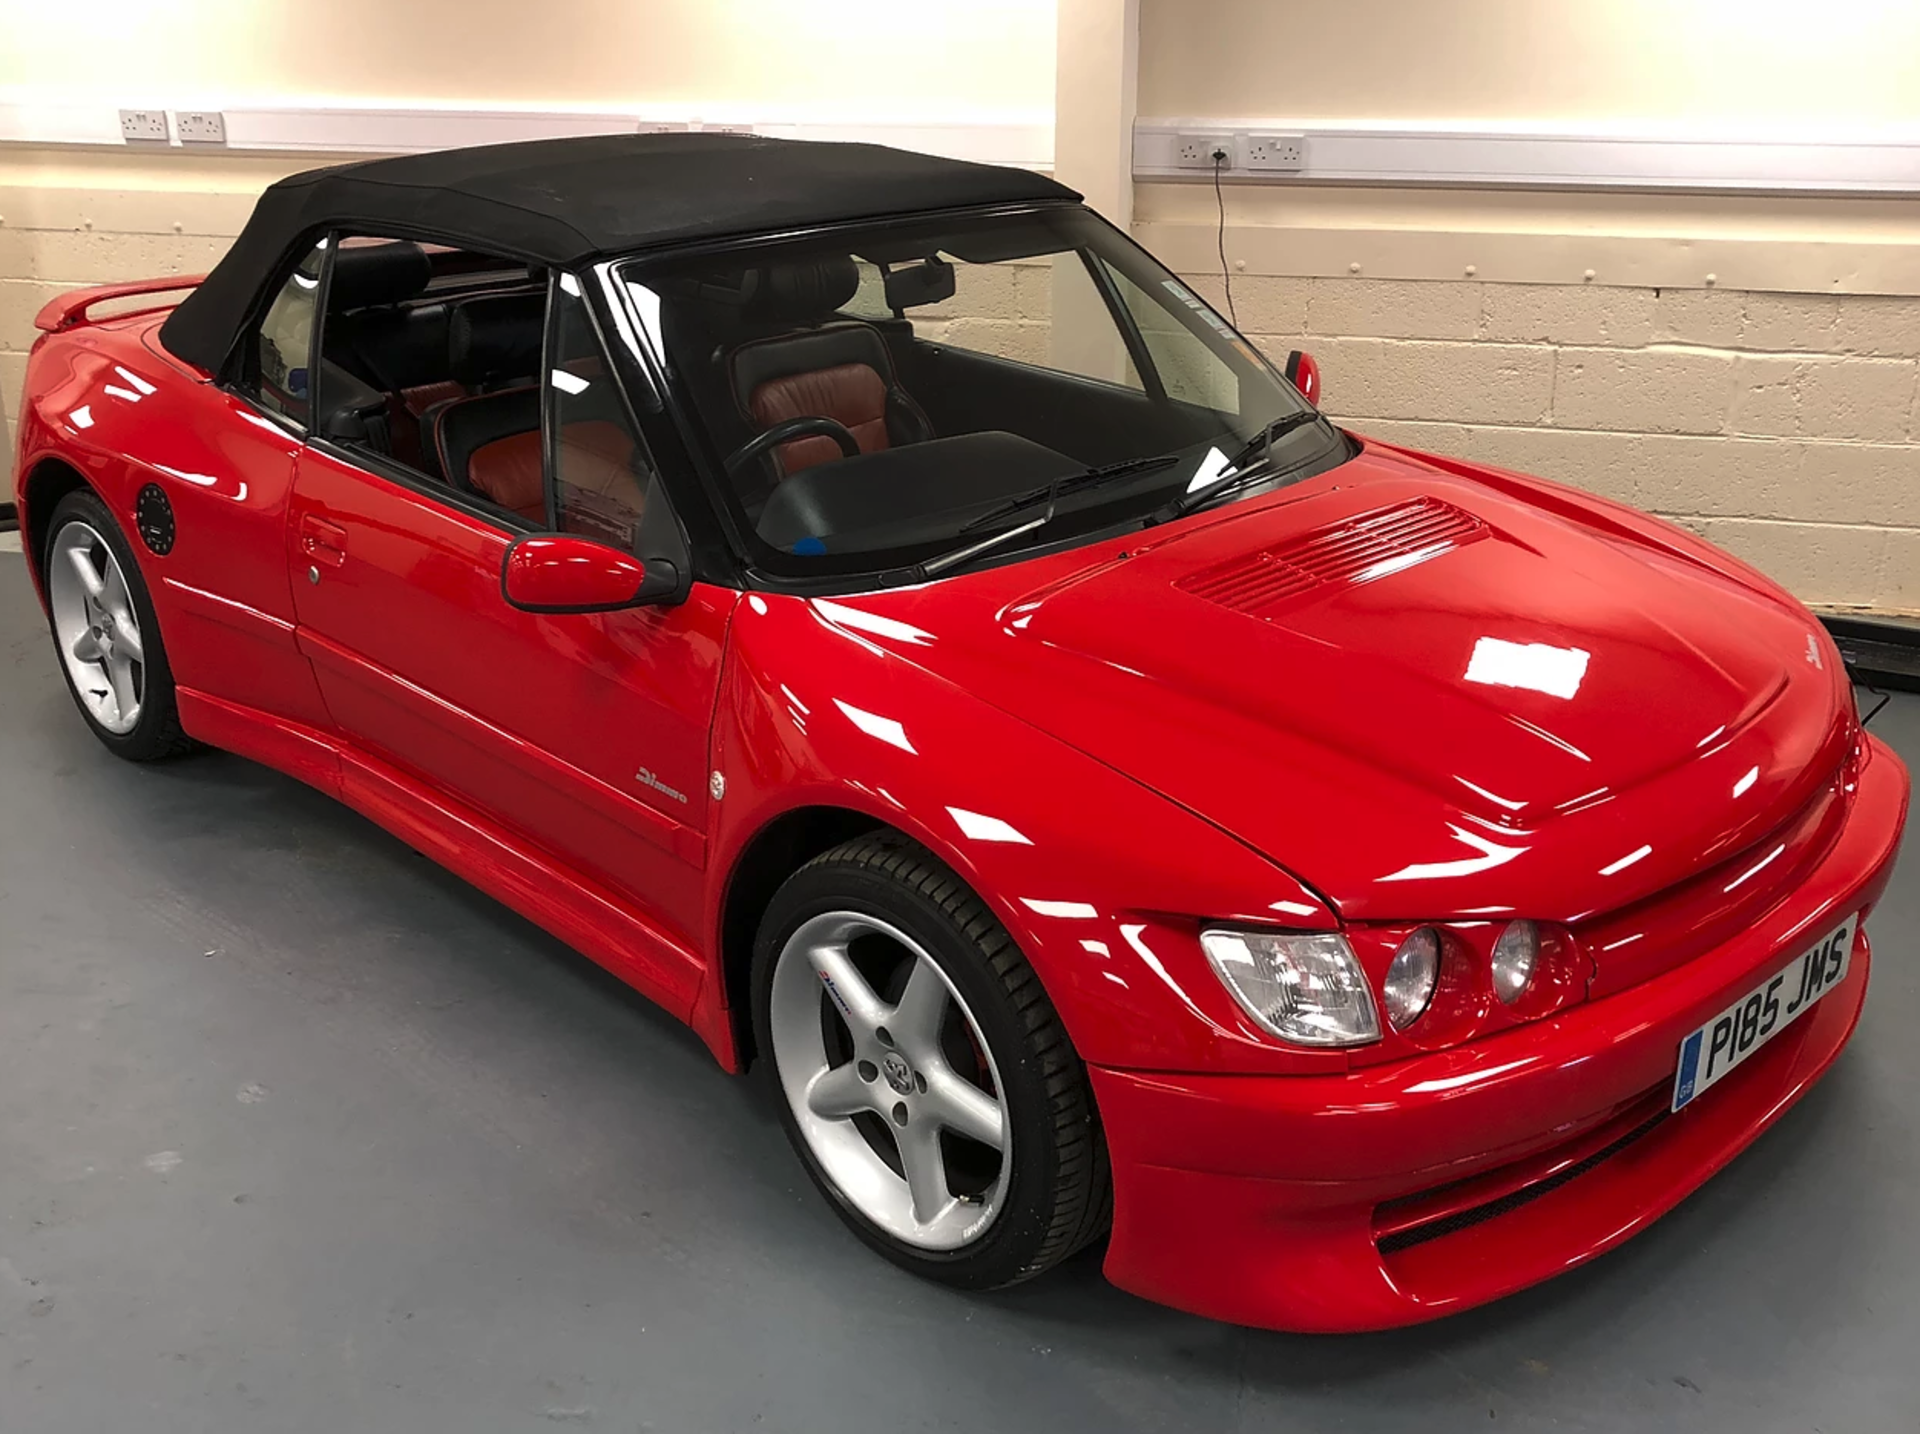 Peugeot 306 2.0i Cabriolet - Dimma prototype. Number 1 of only 2 ever built. - Image 4 of 13